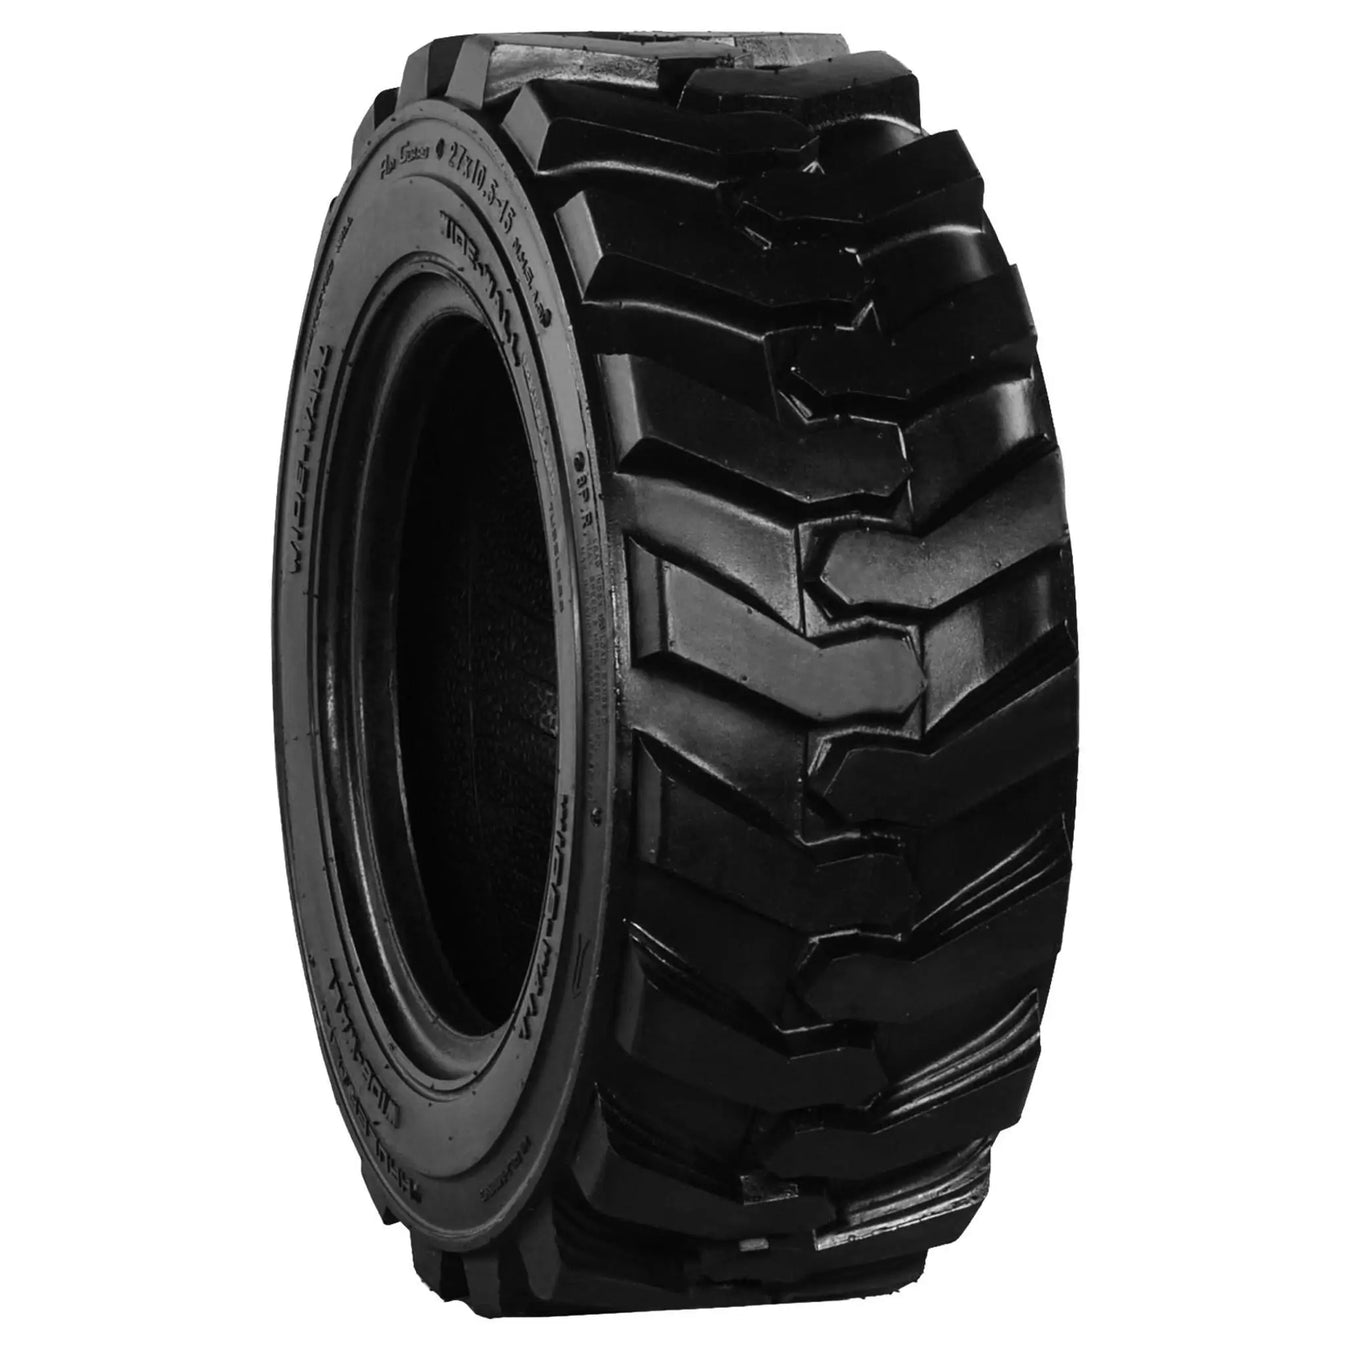 Skid Steer Tires - Pneumatic Tire Size - 27/10.50-15